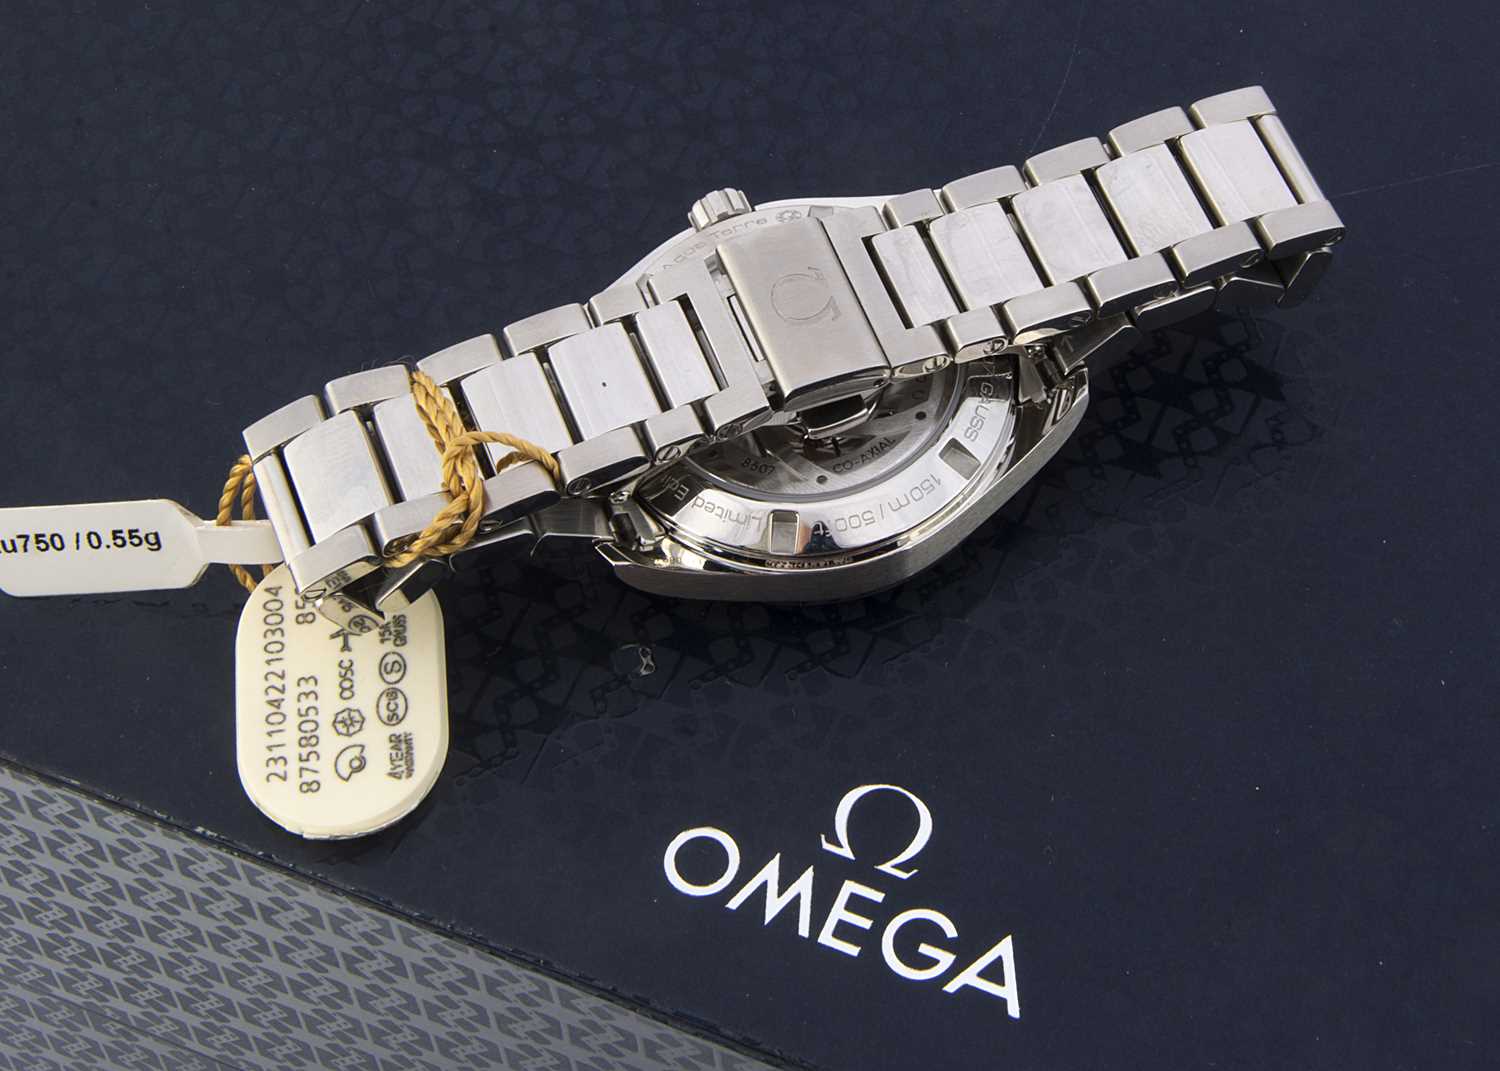 A modern Limited Edition Omega James Bond 007 Spectre Seamaster Master Co-Axial Chronometer automati - Image 10 of 12